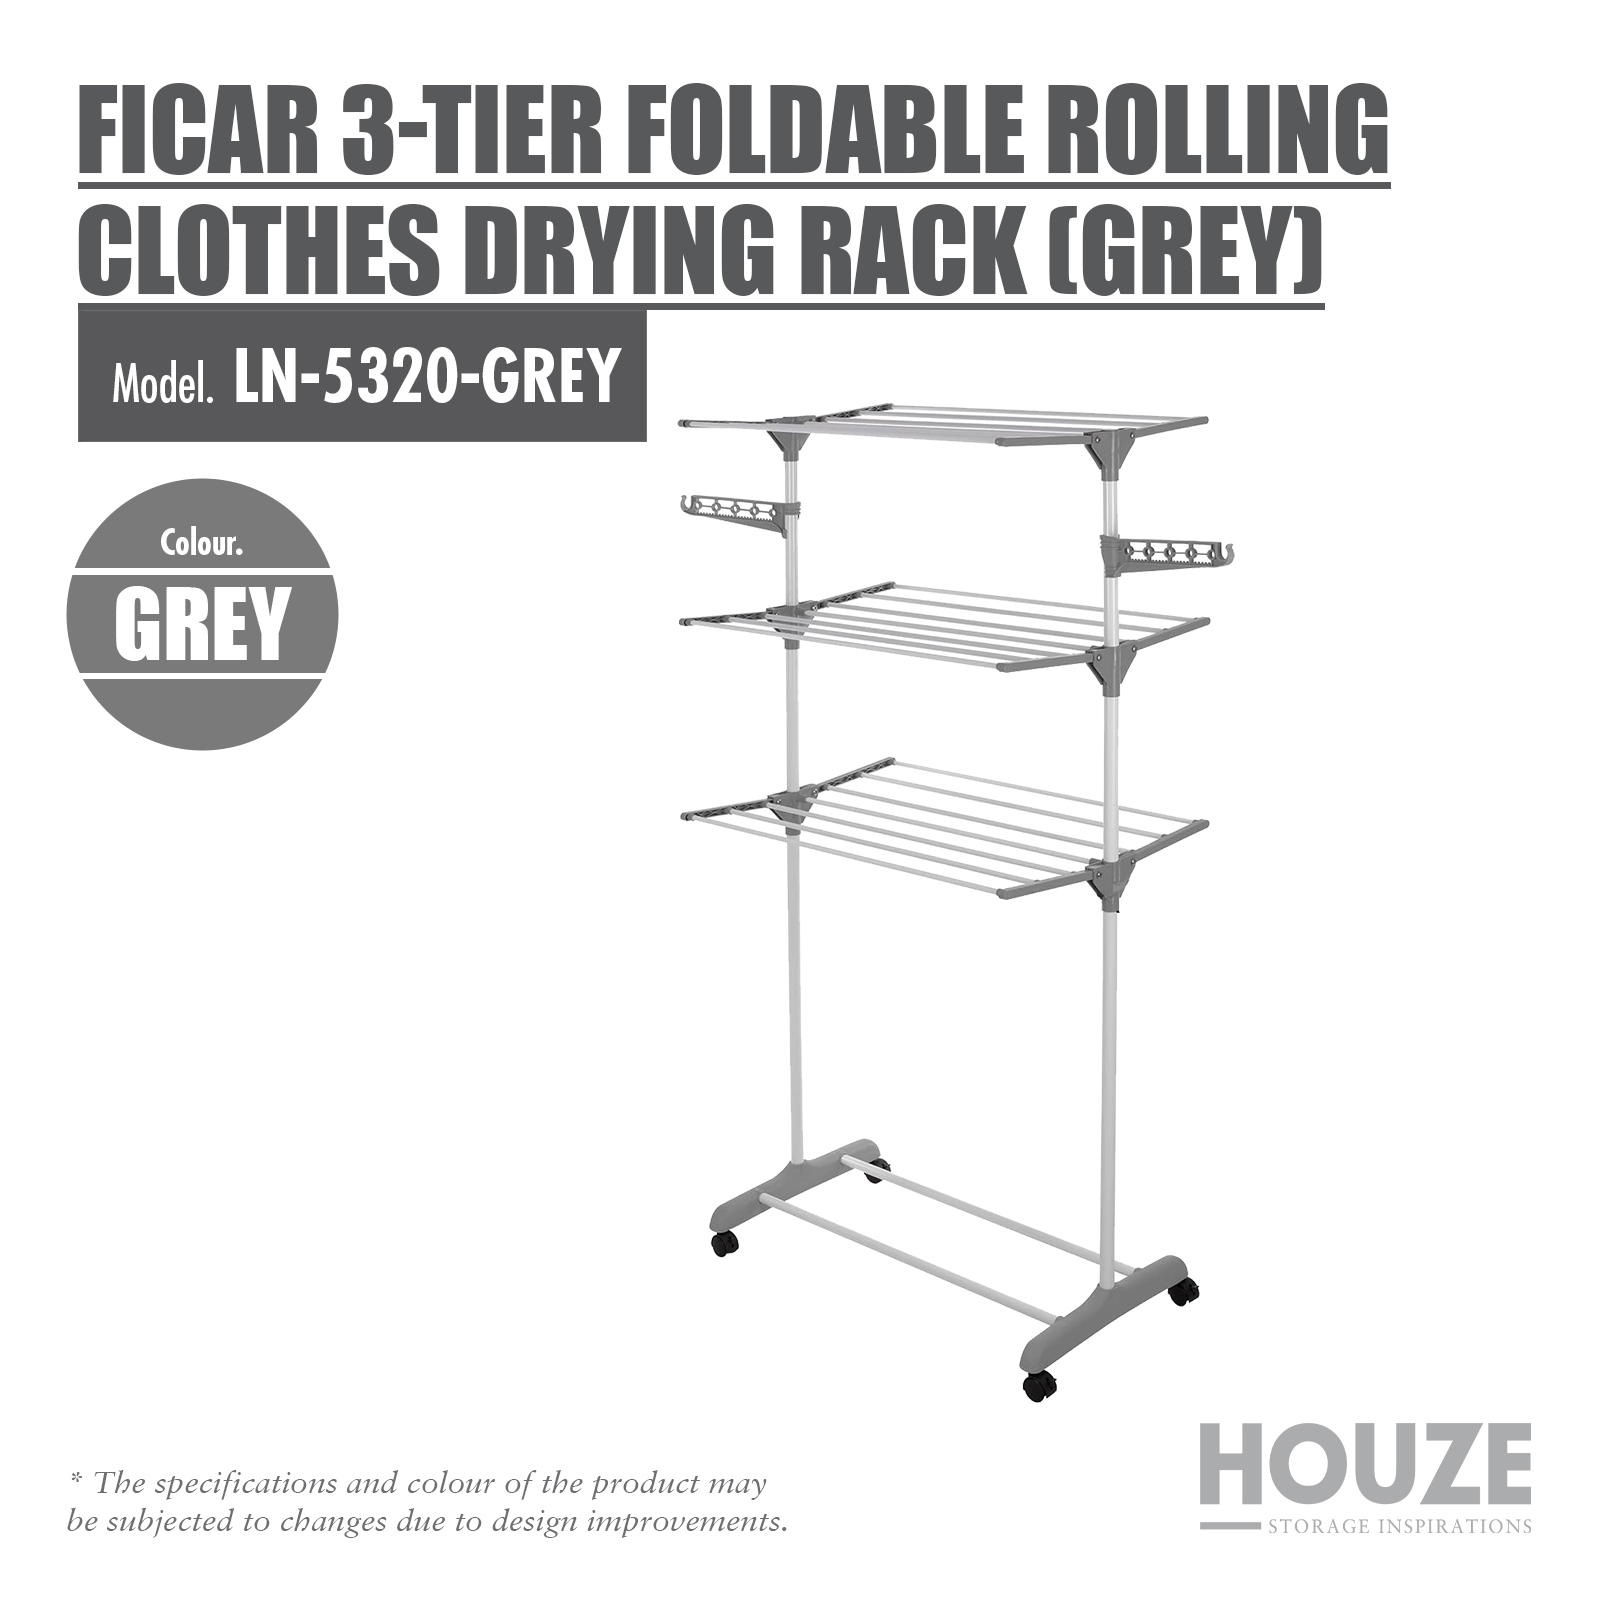 Ficar 3-Tier Foldable Rolling Clothes Drying Rack